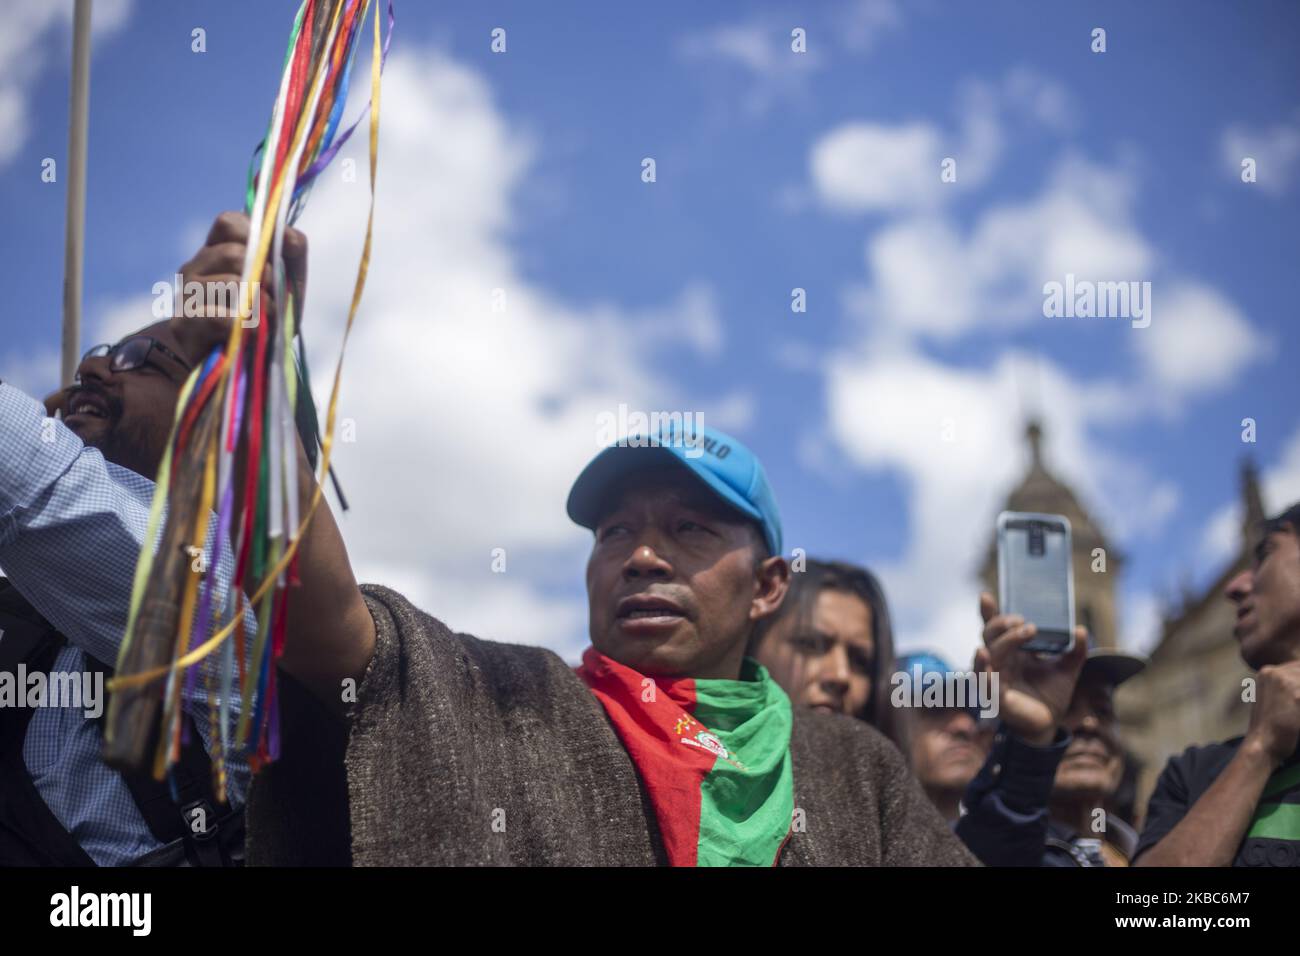 Indigenous depth of Cauca in the third national strike in the city of Bogota, Colombia, on 4 December 2019. This is the third national strike in two weeks amid ongoing protests against social, security and economic policies of President Ivan Duque. Five people have died in connection with the protests since November 21. (Photo by Daniel Garzon Herazo/NurPhoto) Stock Photo